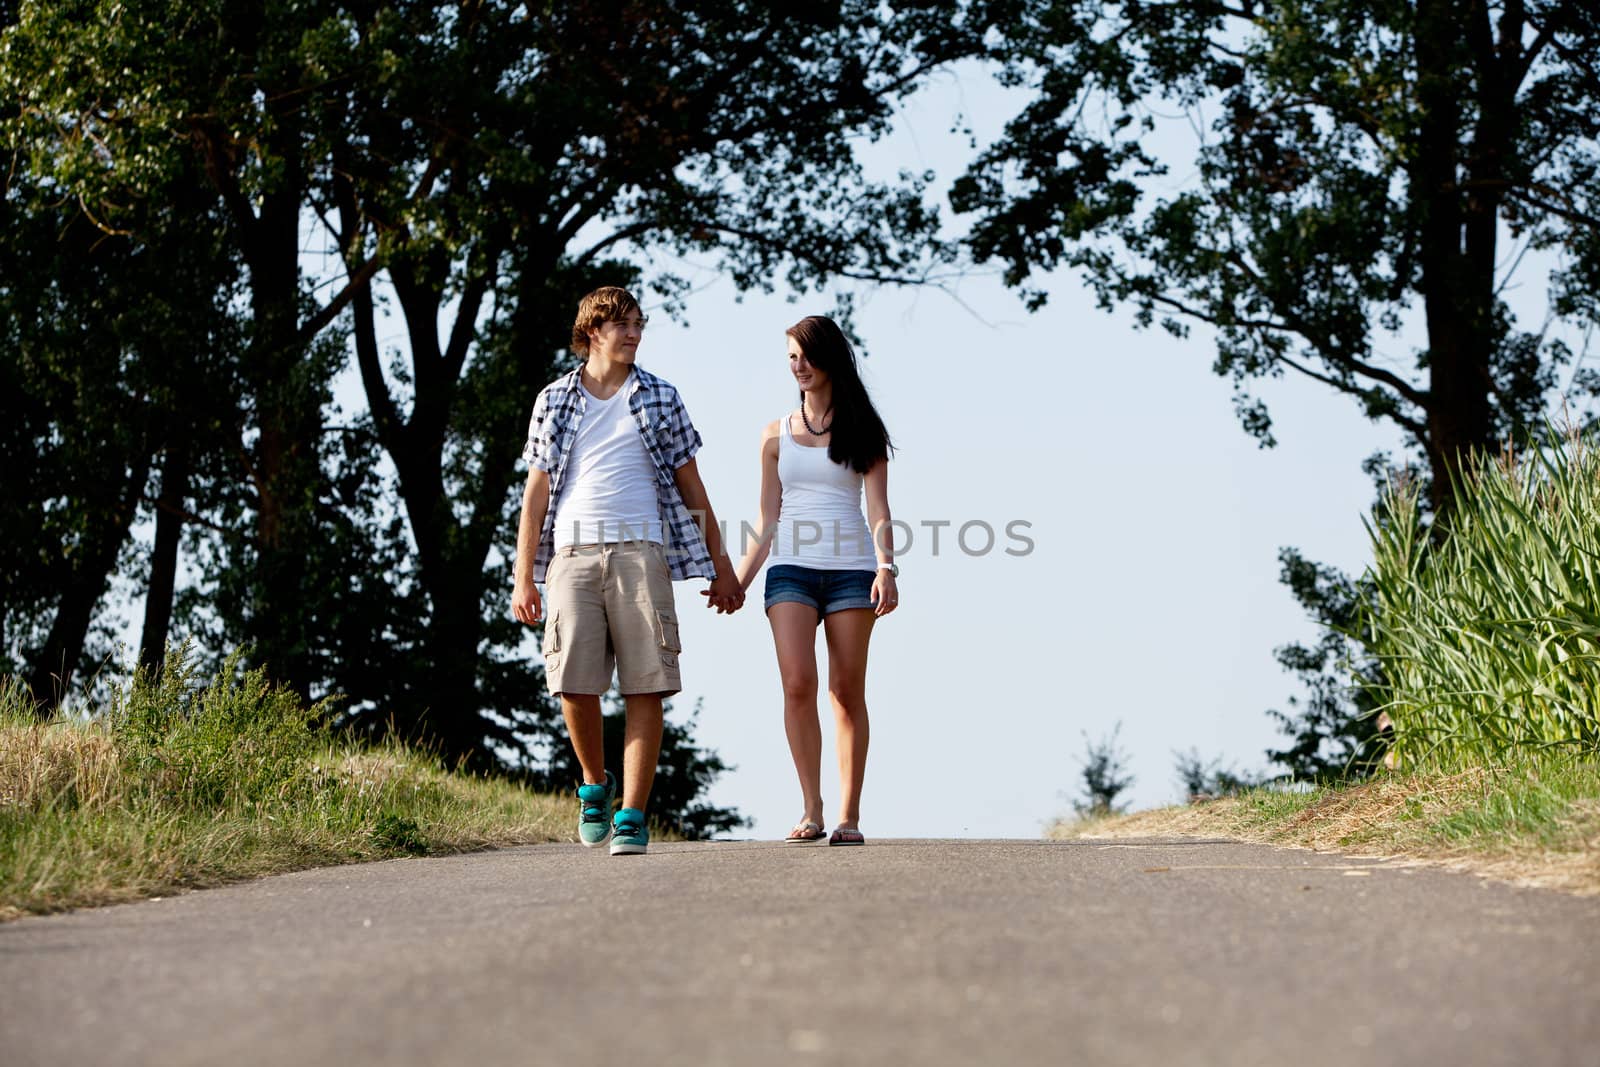 young woman and man is walking on a road in summer outdoor by juniart